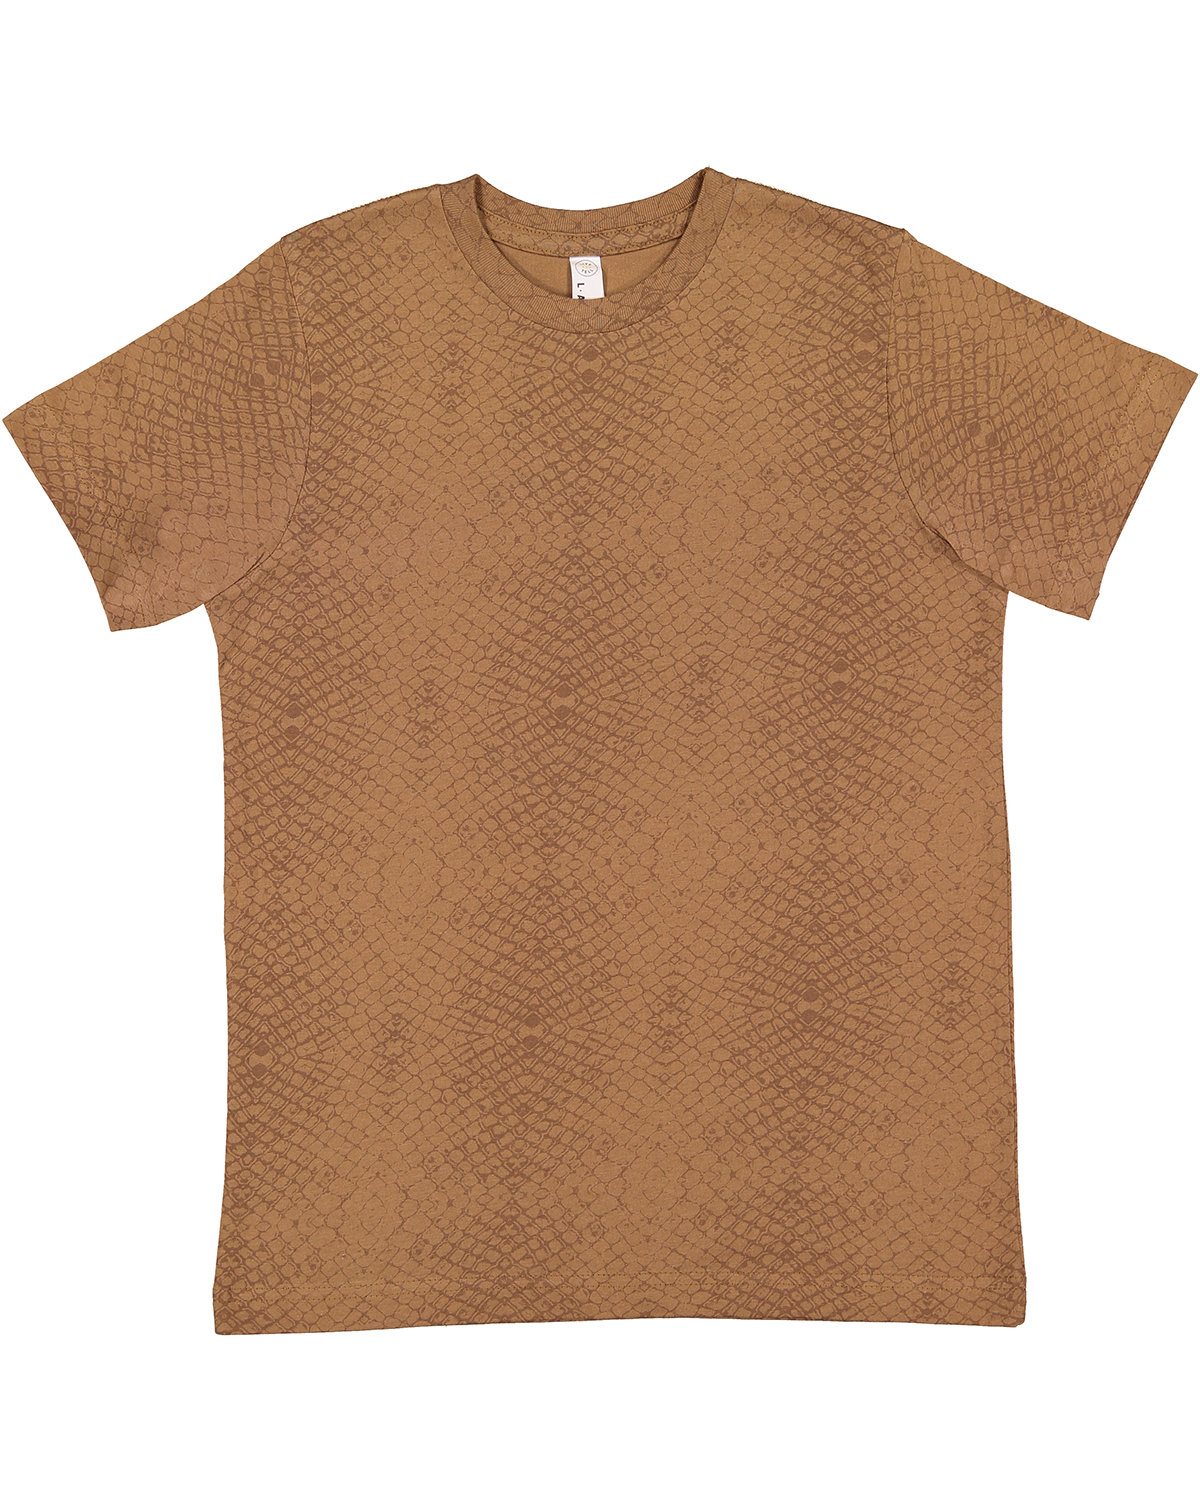 LAT Youth Fine Jersey T-Shirt brown reptile 